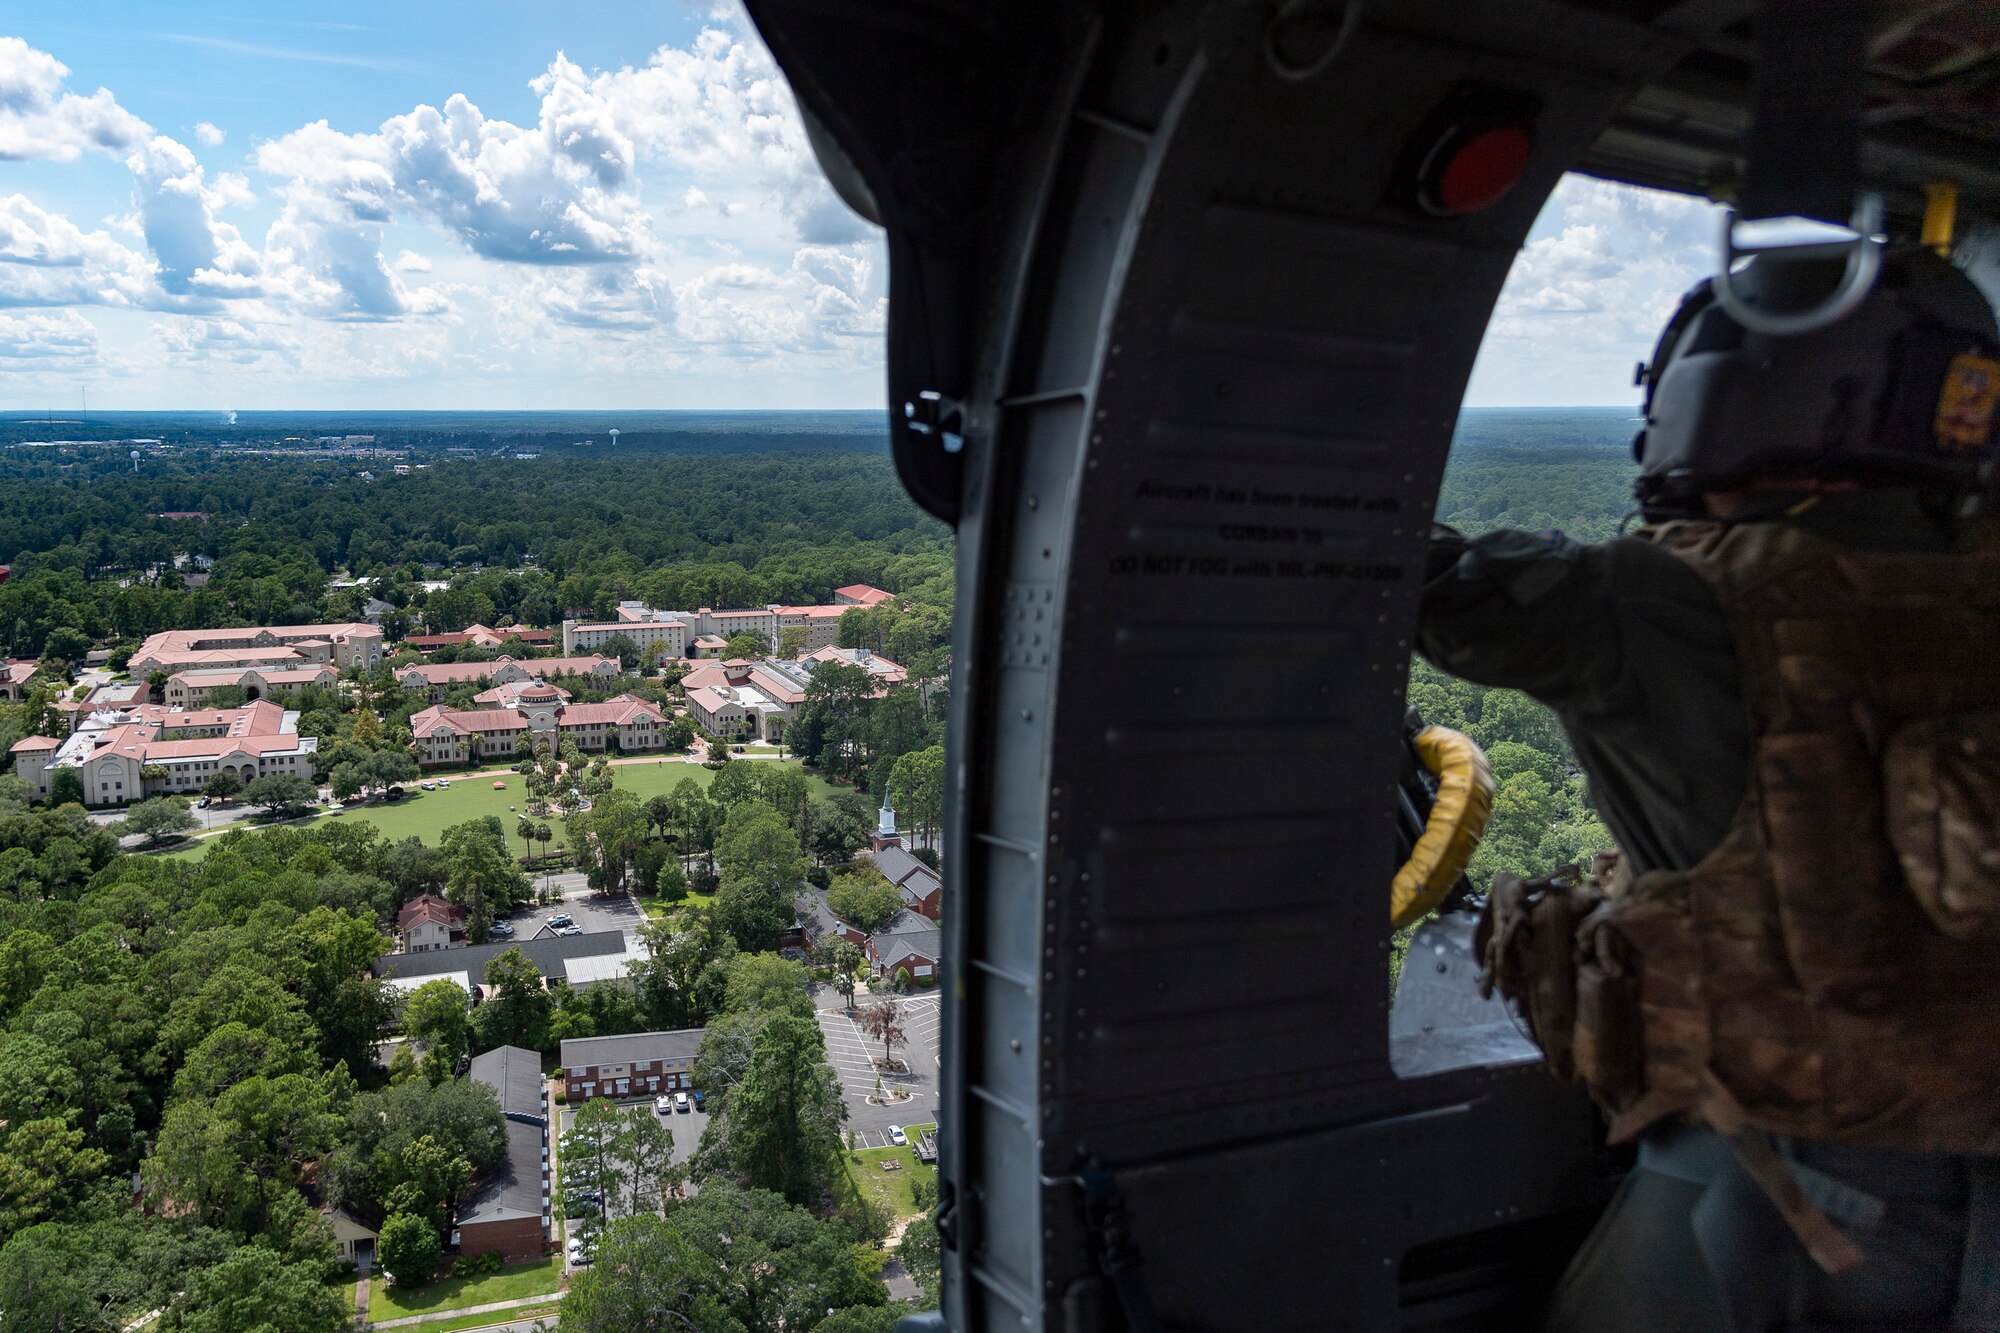 An Airman assigned to the 41st Rescue Squadron (RQS) looks out of an HH-60G Pave Hawk over Valdosta State University (VSU) before National Night Out Aug. 6, 2019, in Valdosta, Ga. National Night Out is an annual event that promotes relationships between police and the community in an effort to prevent crime. Representatives from Team Moody participated to create local community awareness and build support for the Air Force mission. (U.S. Air Force photo by Airman 1st Class Hayden Legg)